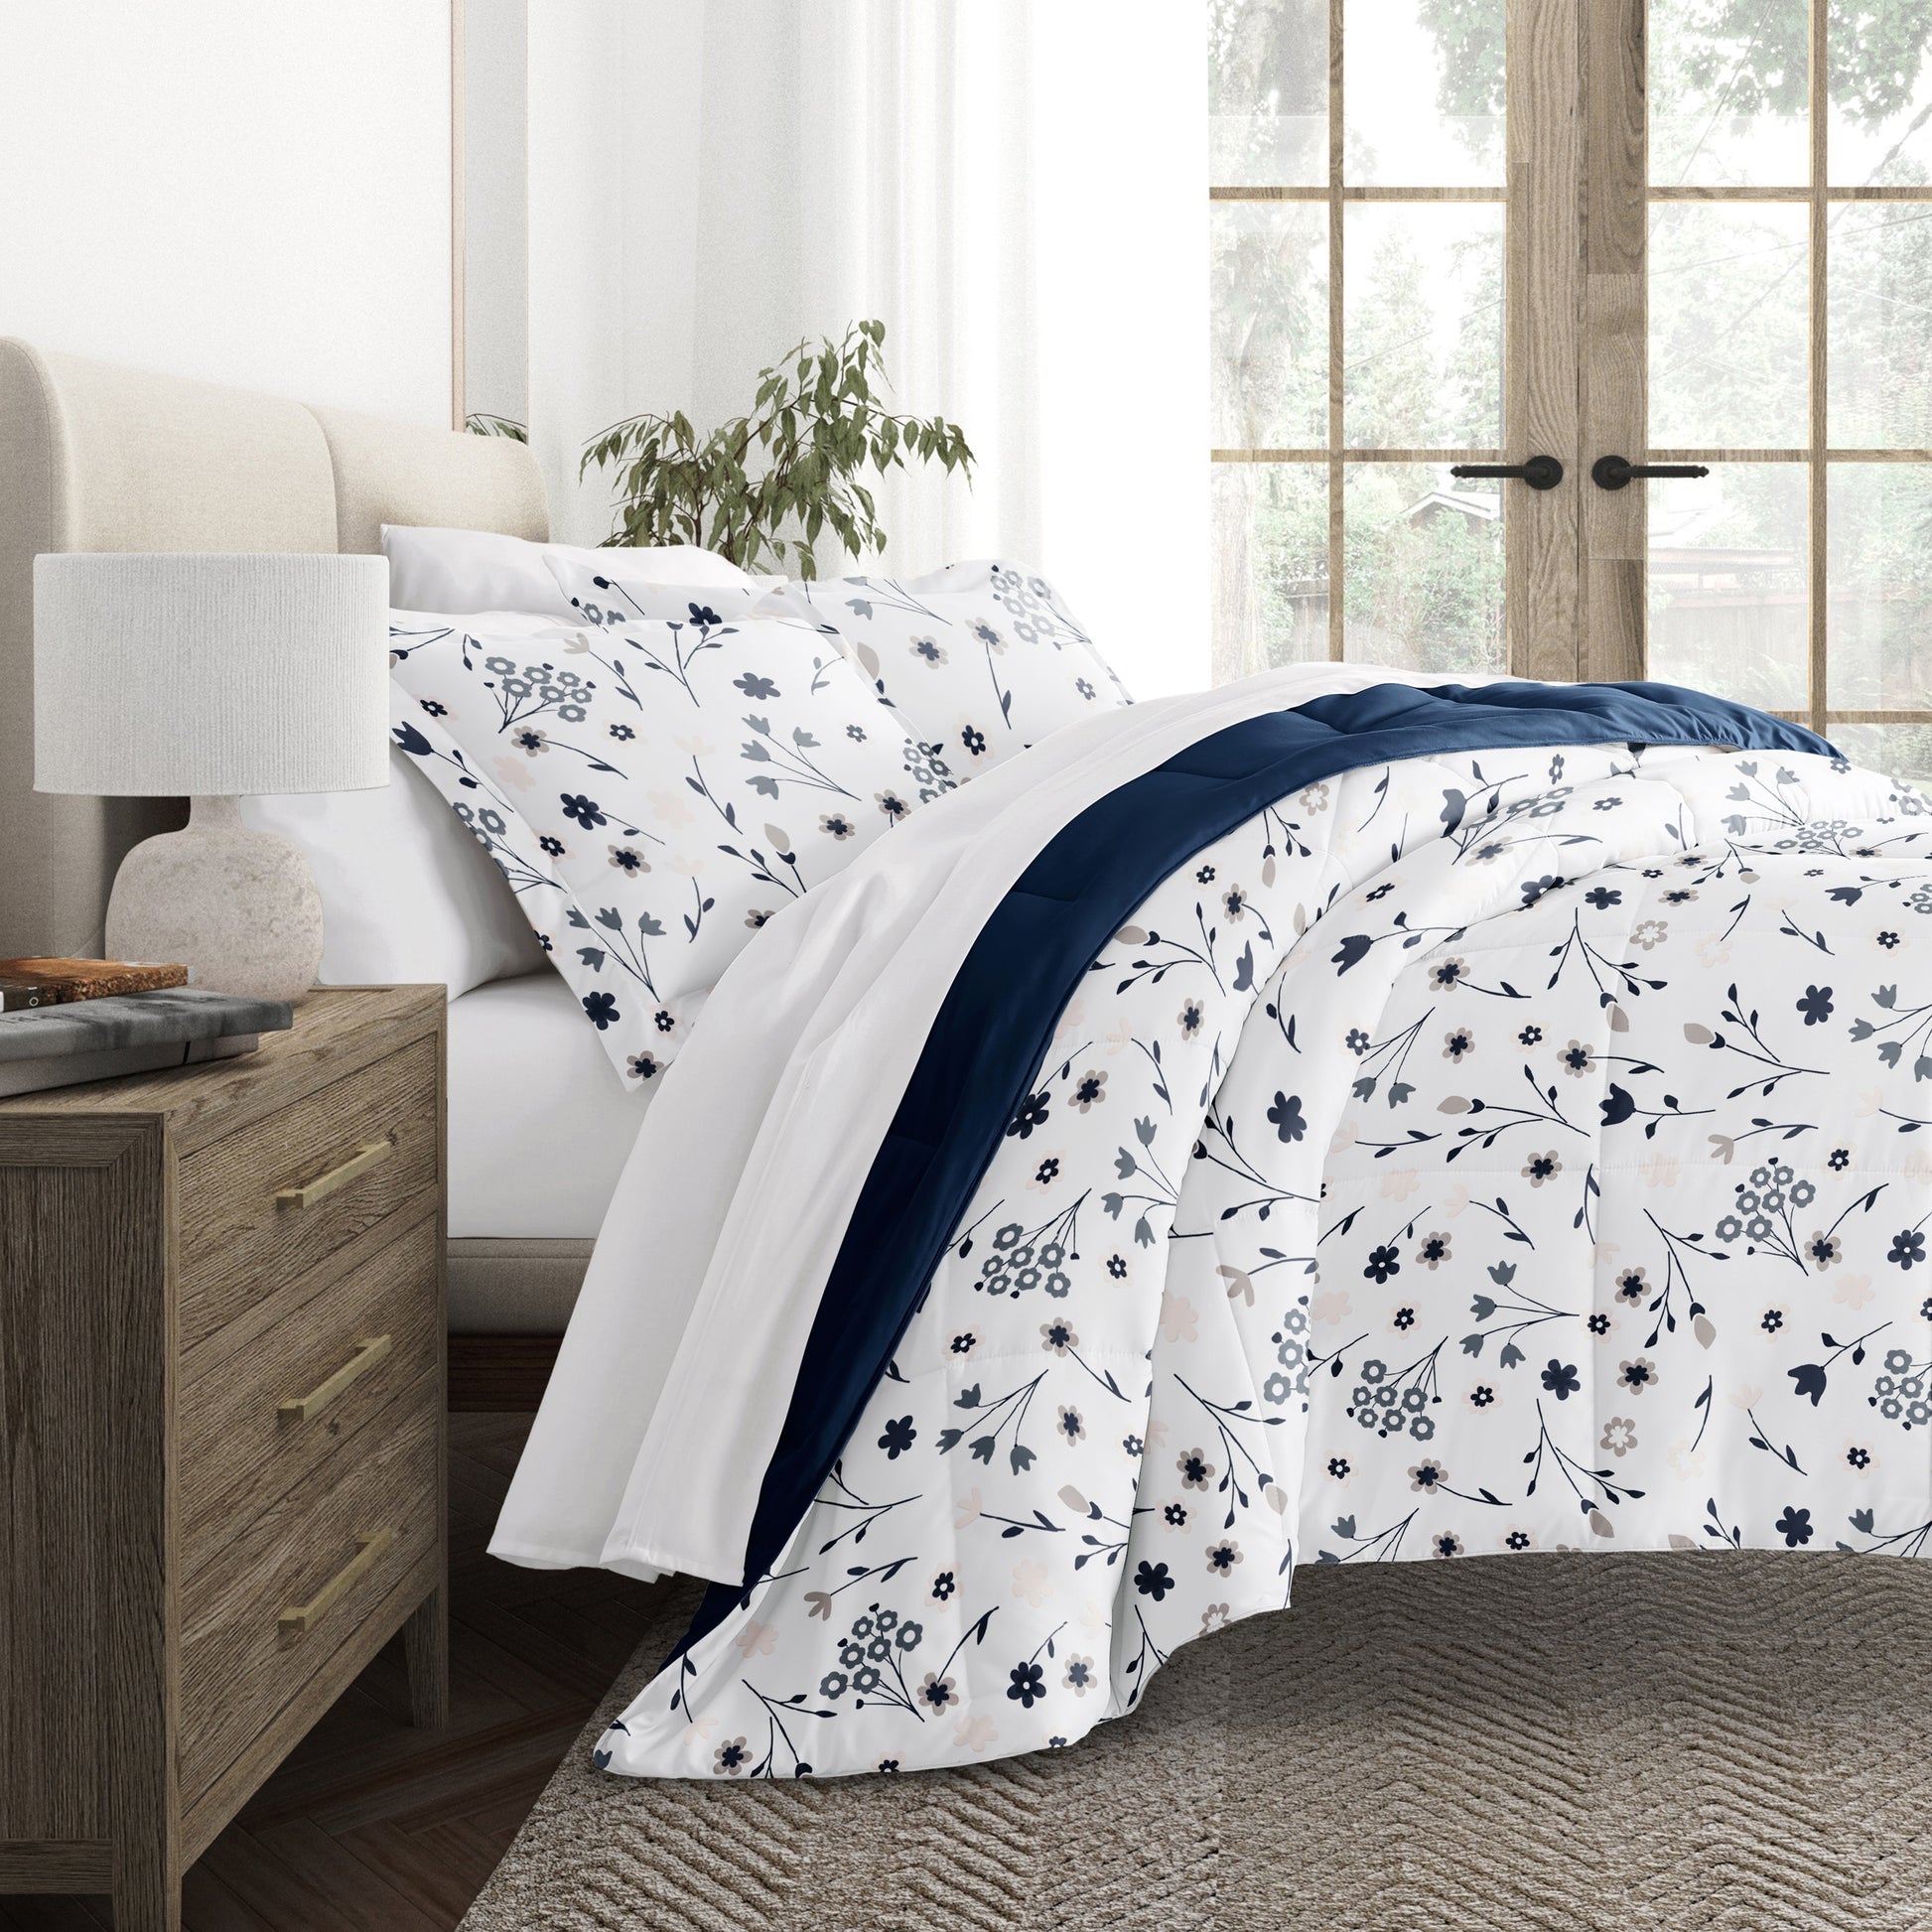 Comforter Sets Reversible Patterns to Solid Color – iEnjoy Home